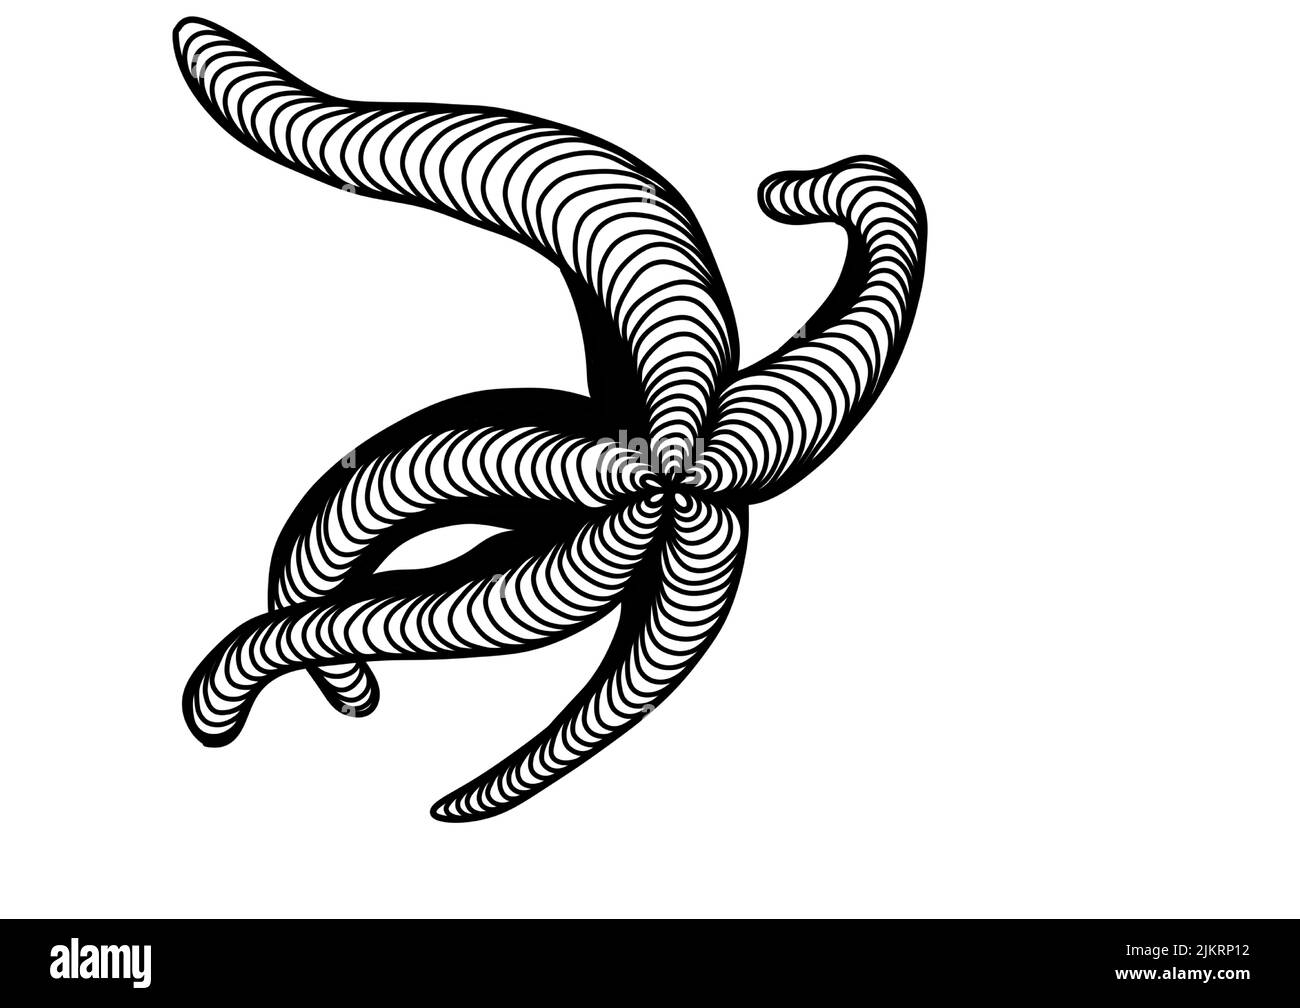 A Black and white line art drawing of a star fish for background, logo and other illustration needs Stock Vector